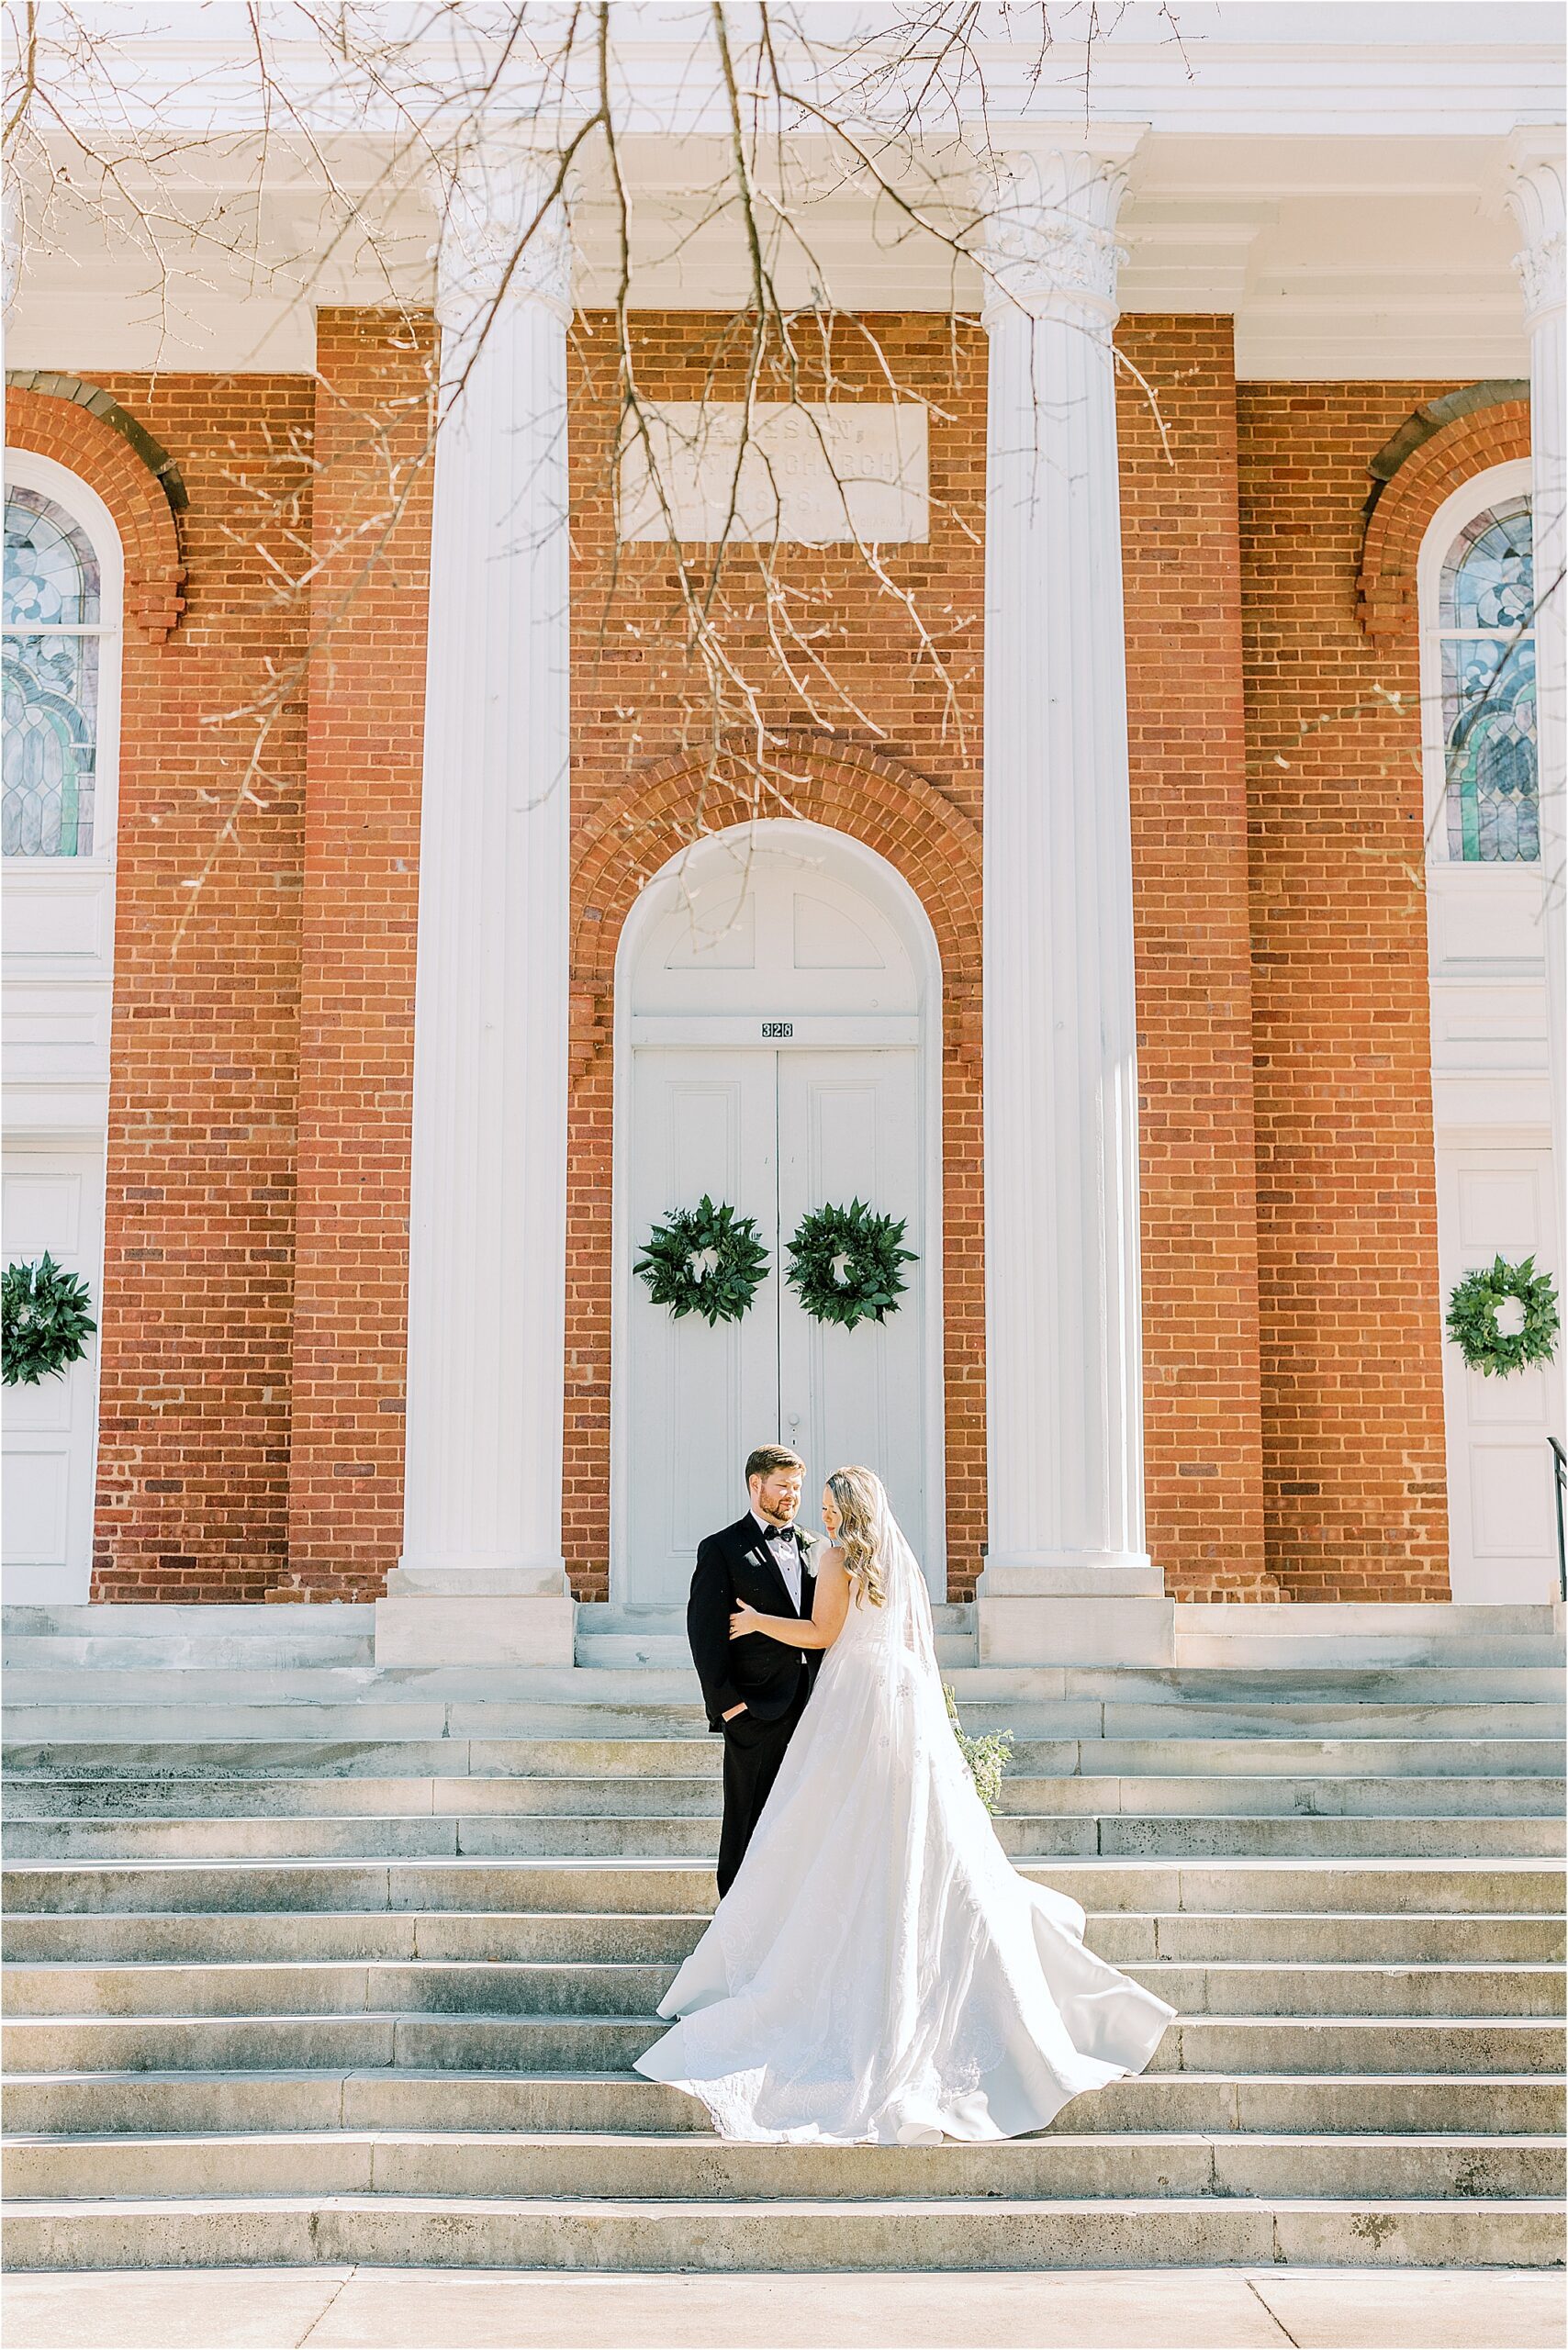 Bride in a white dress while holding flowers, and the groom in a black tuxedo is standing on the porch steps of a brick building with white doors. 